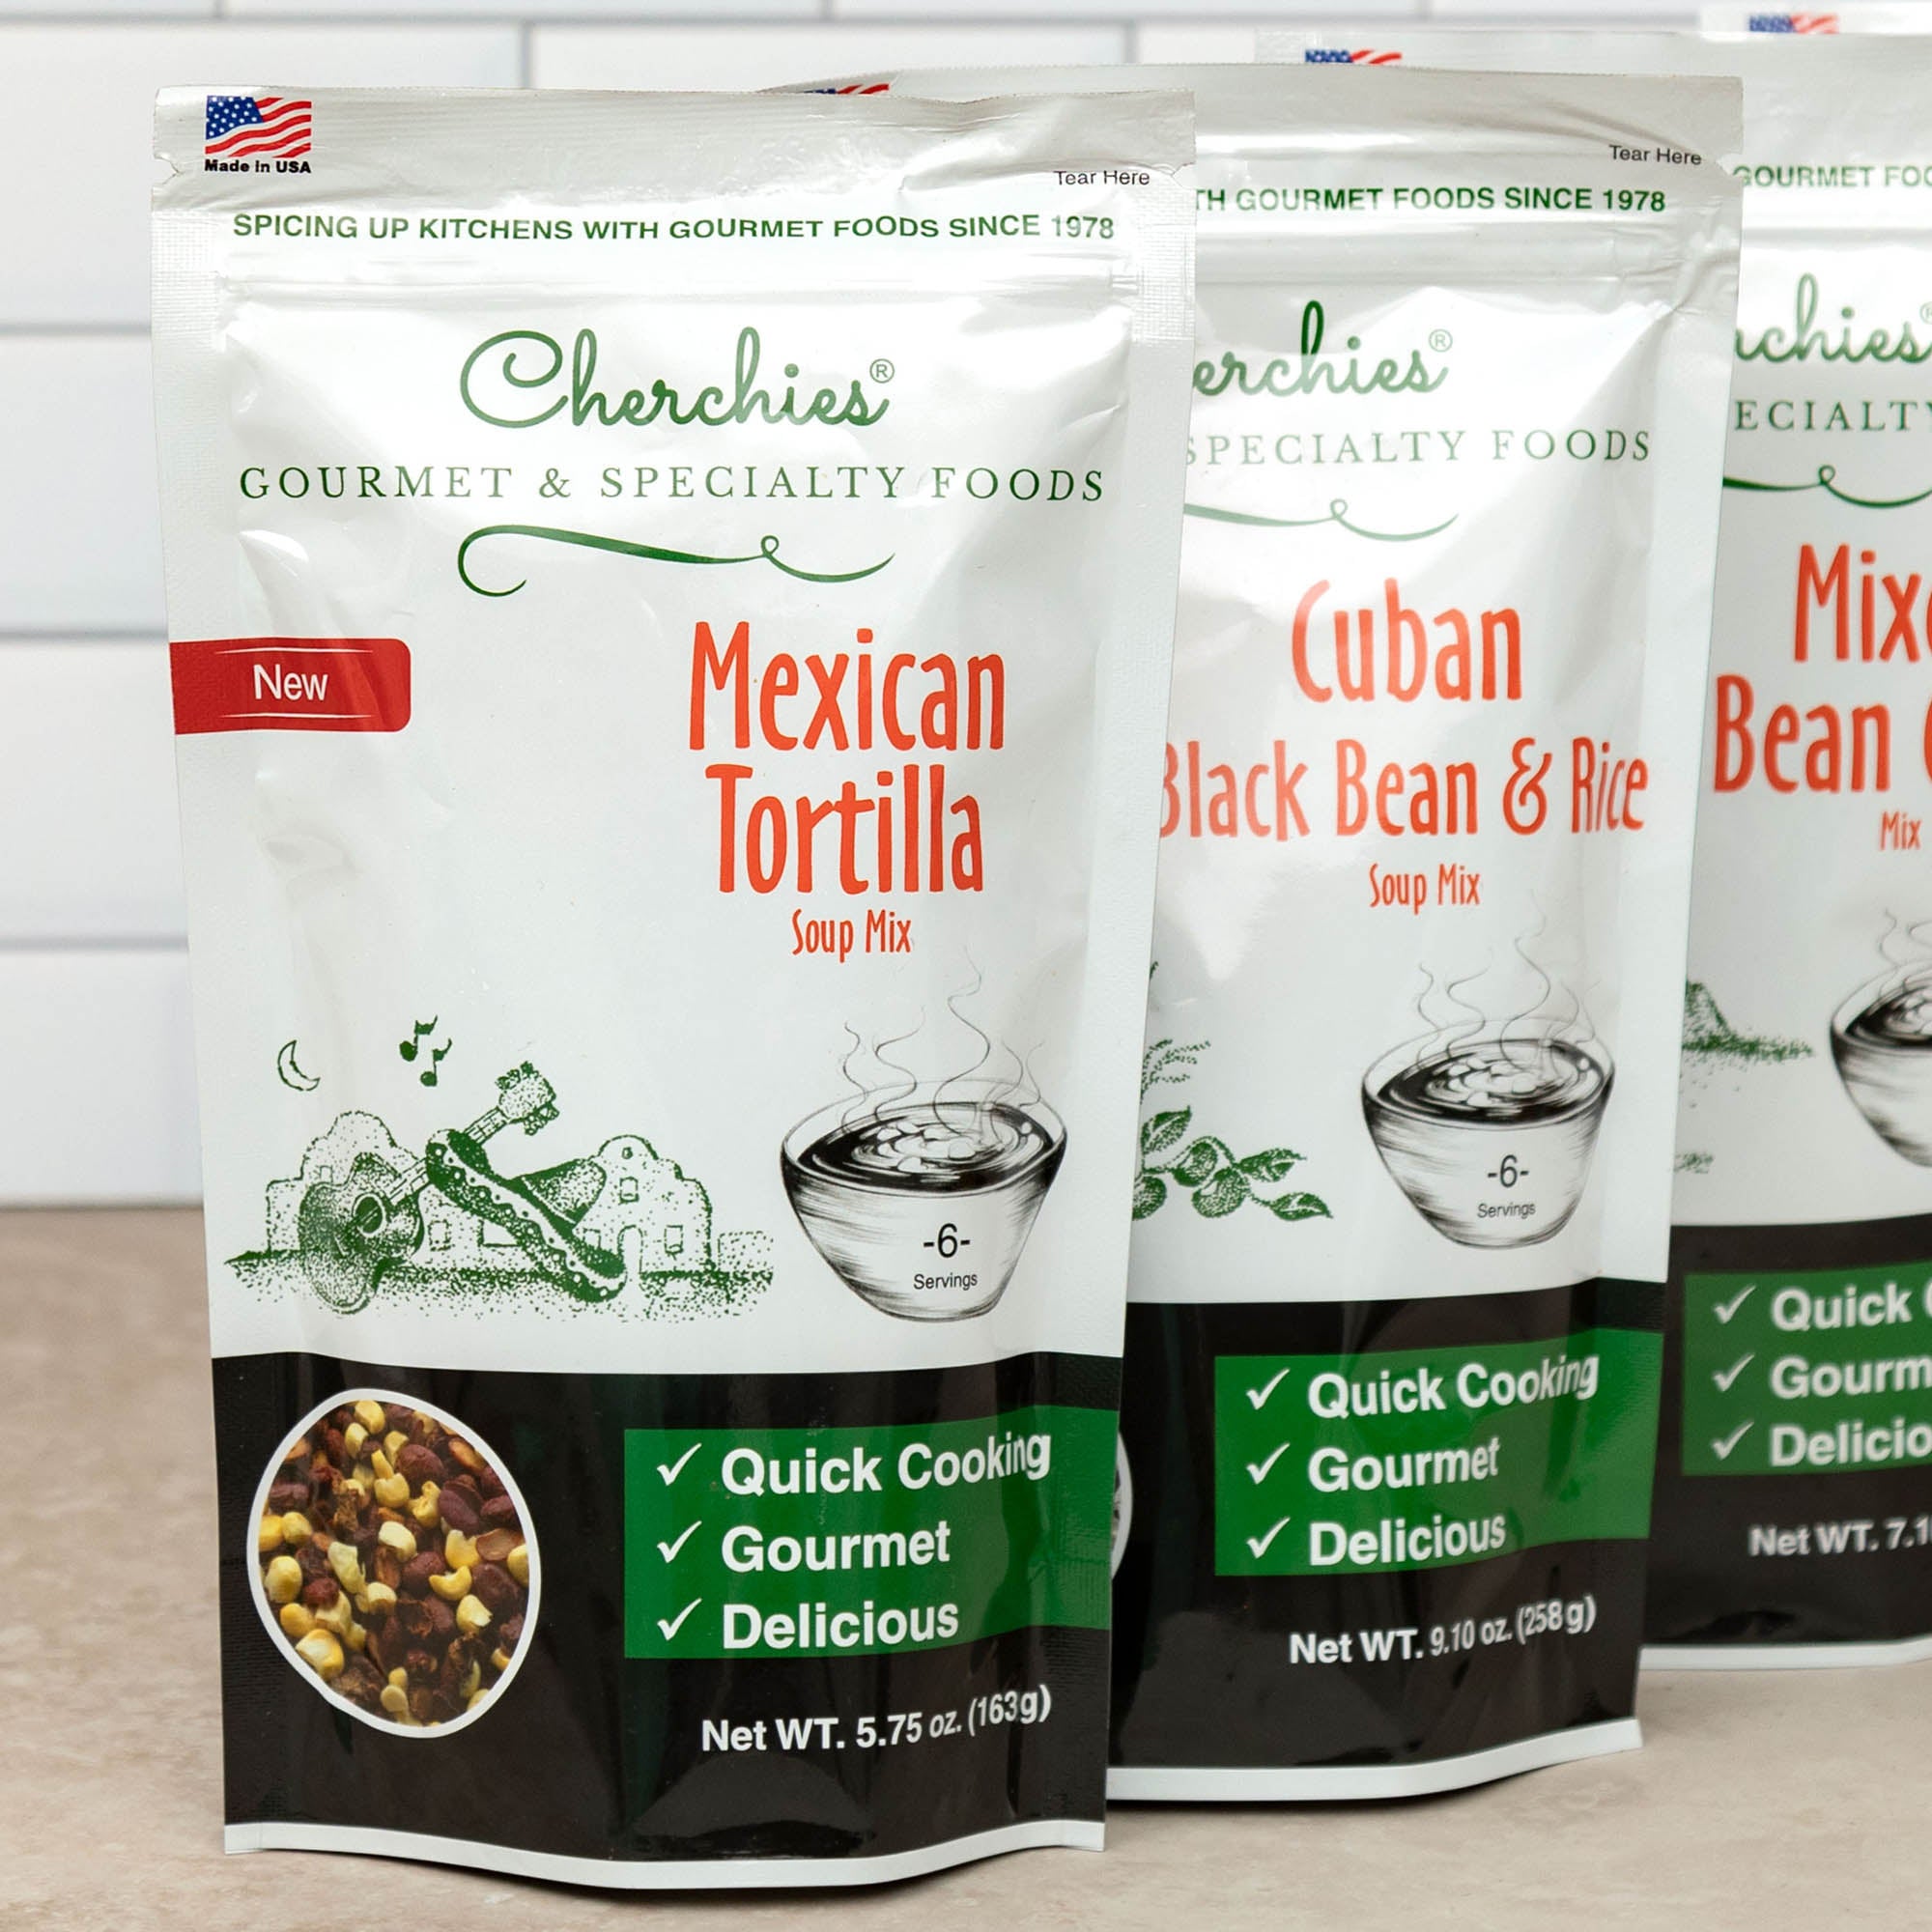 Cherchies® Quick Cooking Spicy Soup Mix - Gumbo Stew